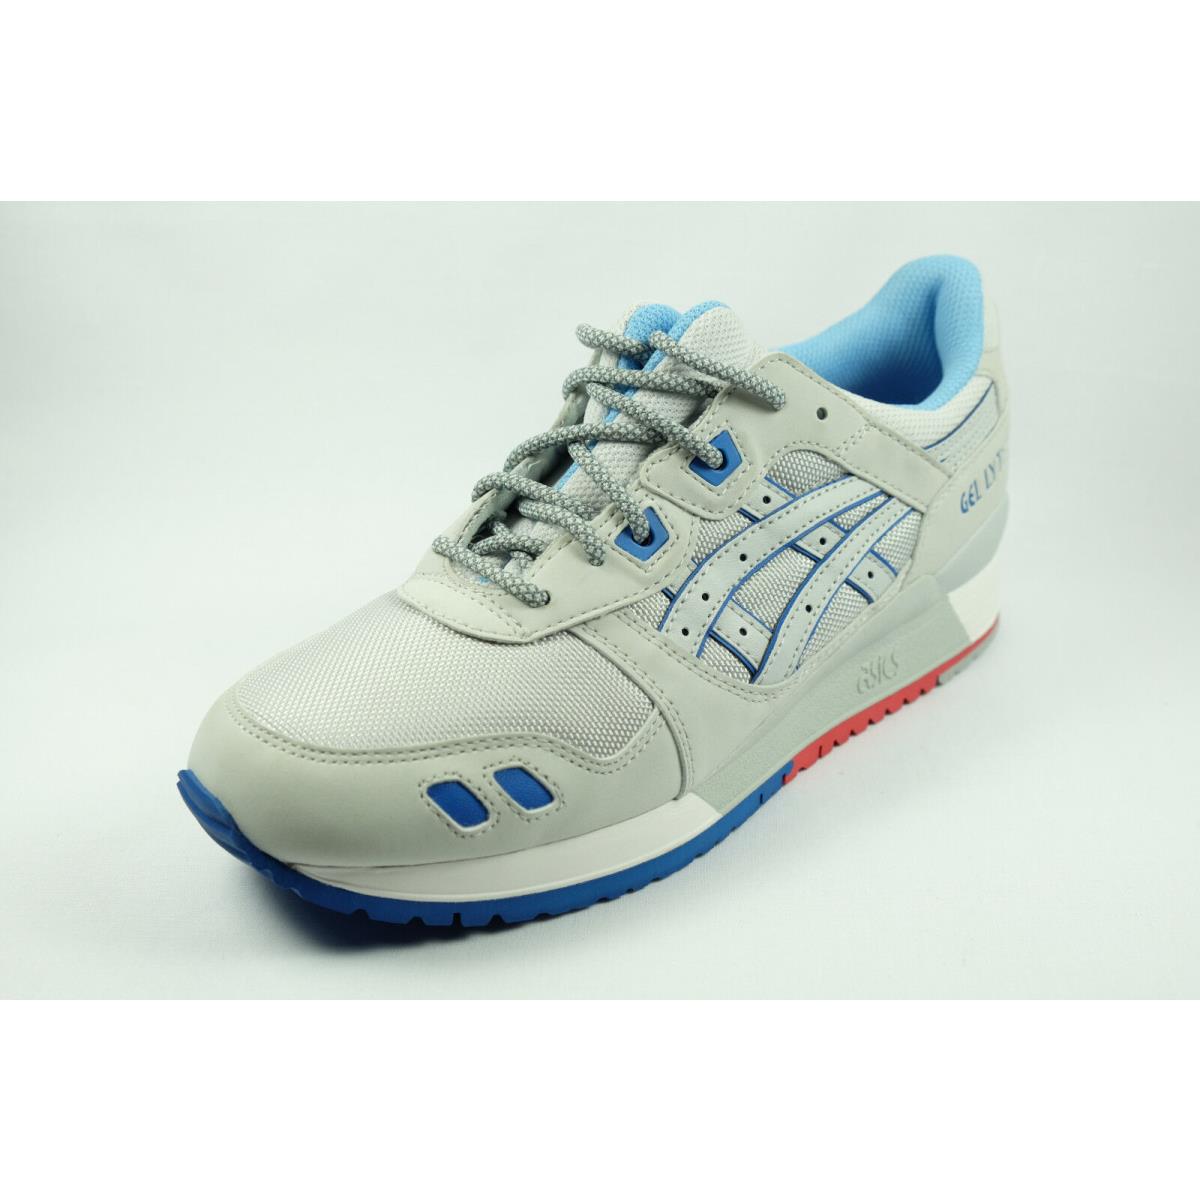 ASICS shoes III - Soft Grey / Blue / Red 0